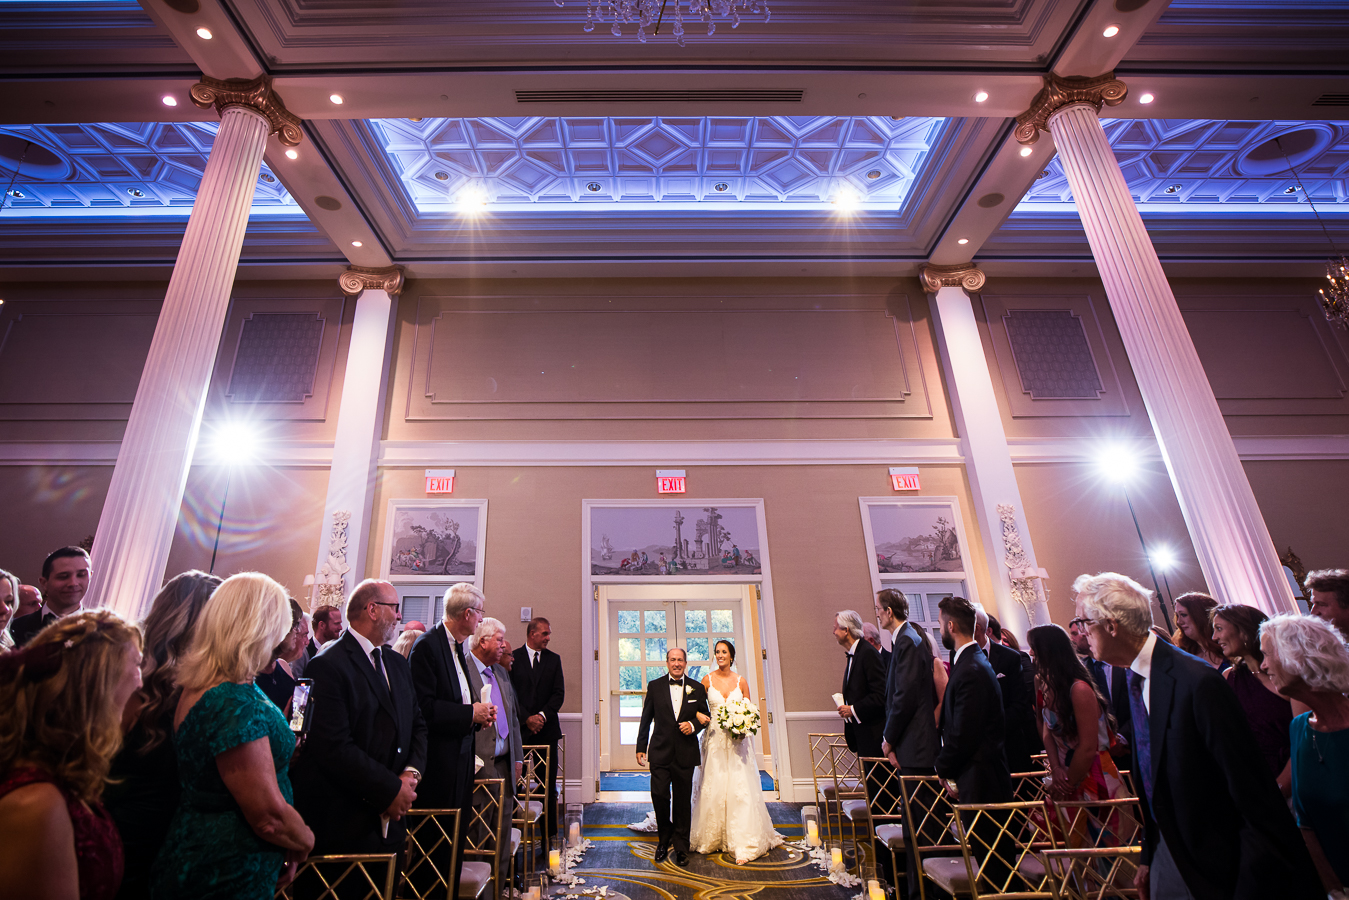 nj wedding photographer, lisa rhinehart, captures the moment that the bride walks down the aisle with her father at this palace at somerset wedding ceremony 